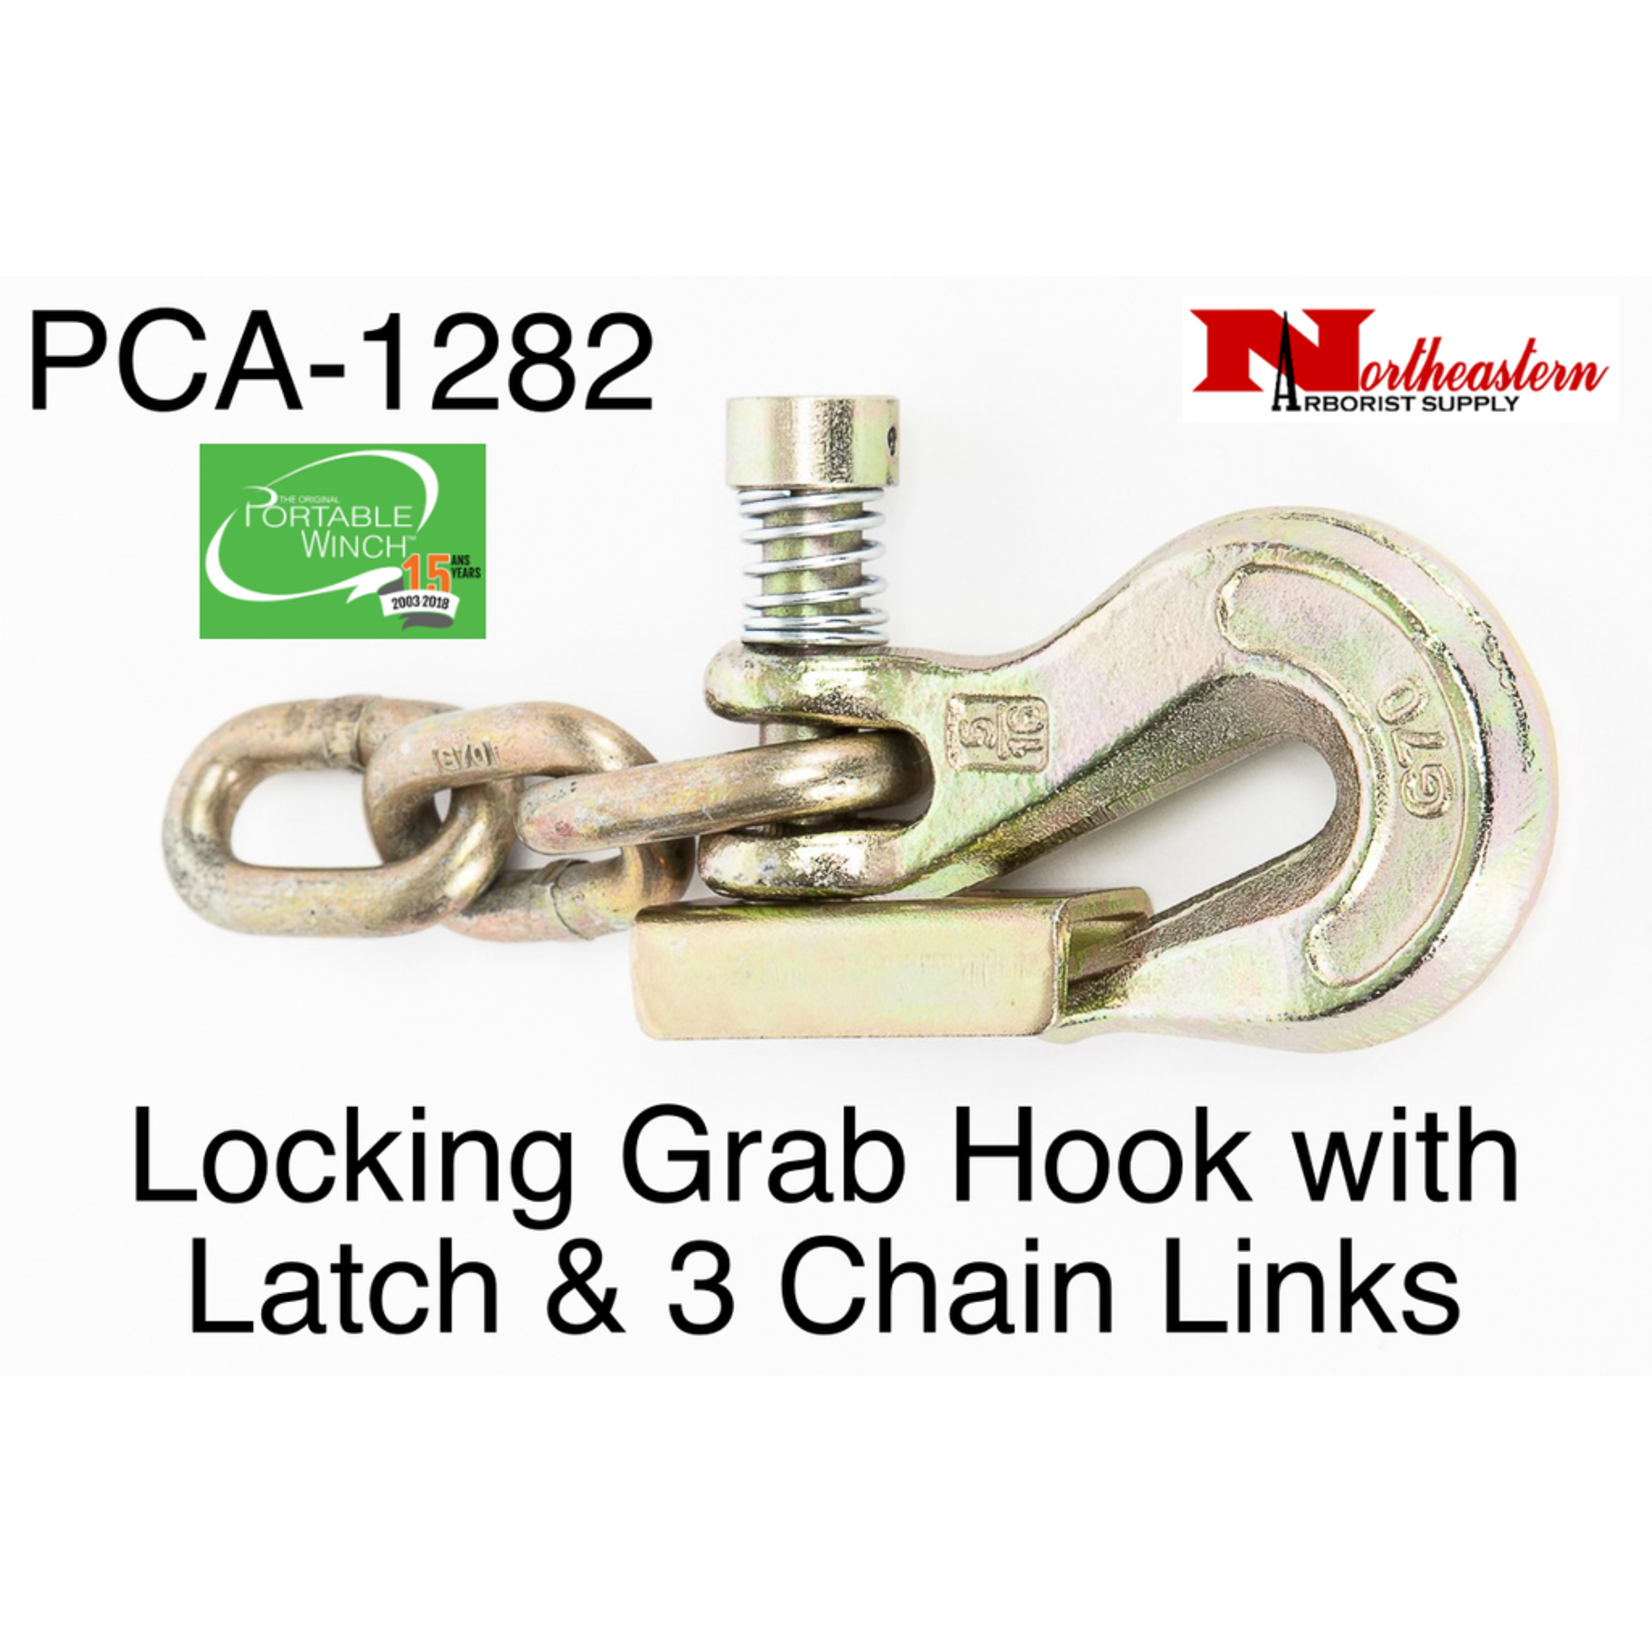 PORTABLE WINCH CO. Grab Hook 5/16" w/Latch & 3 Chain Links